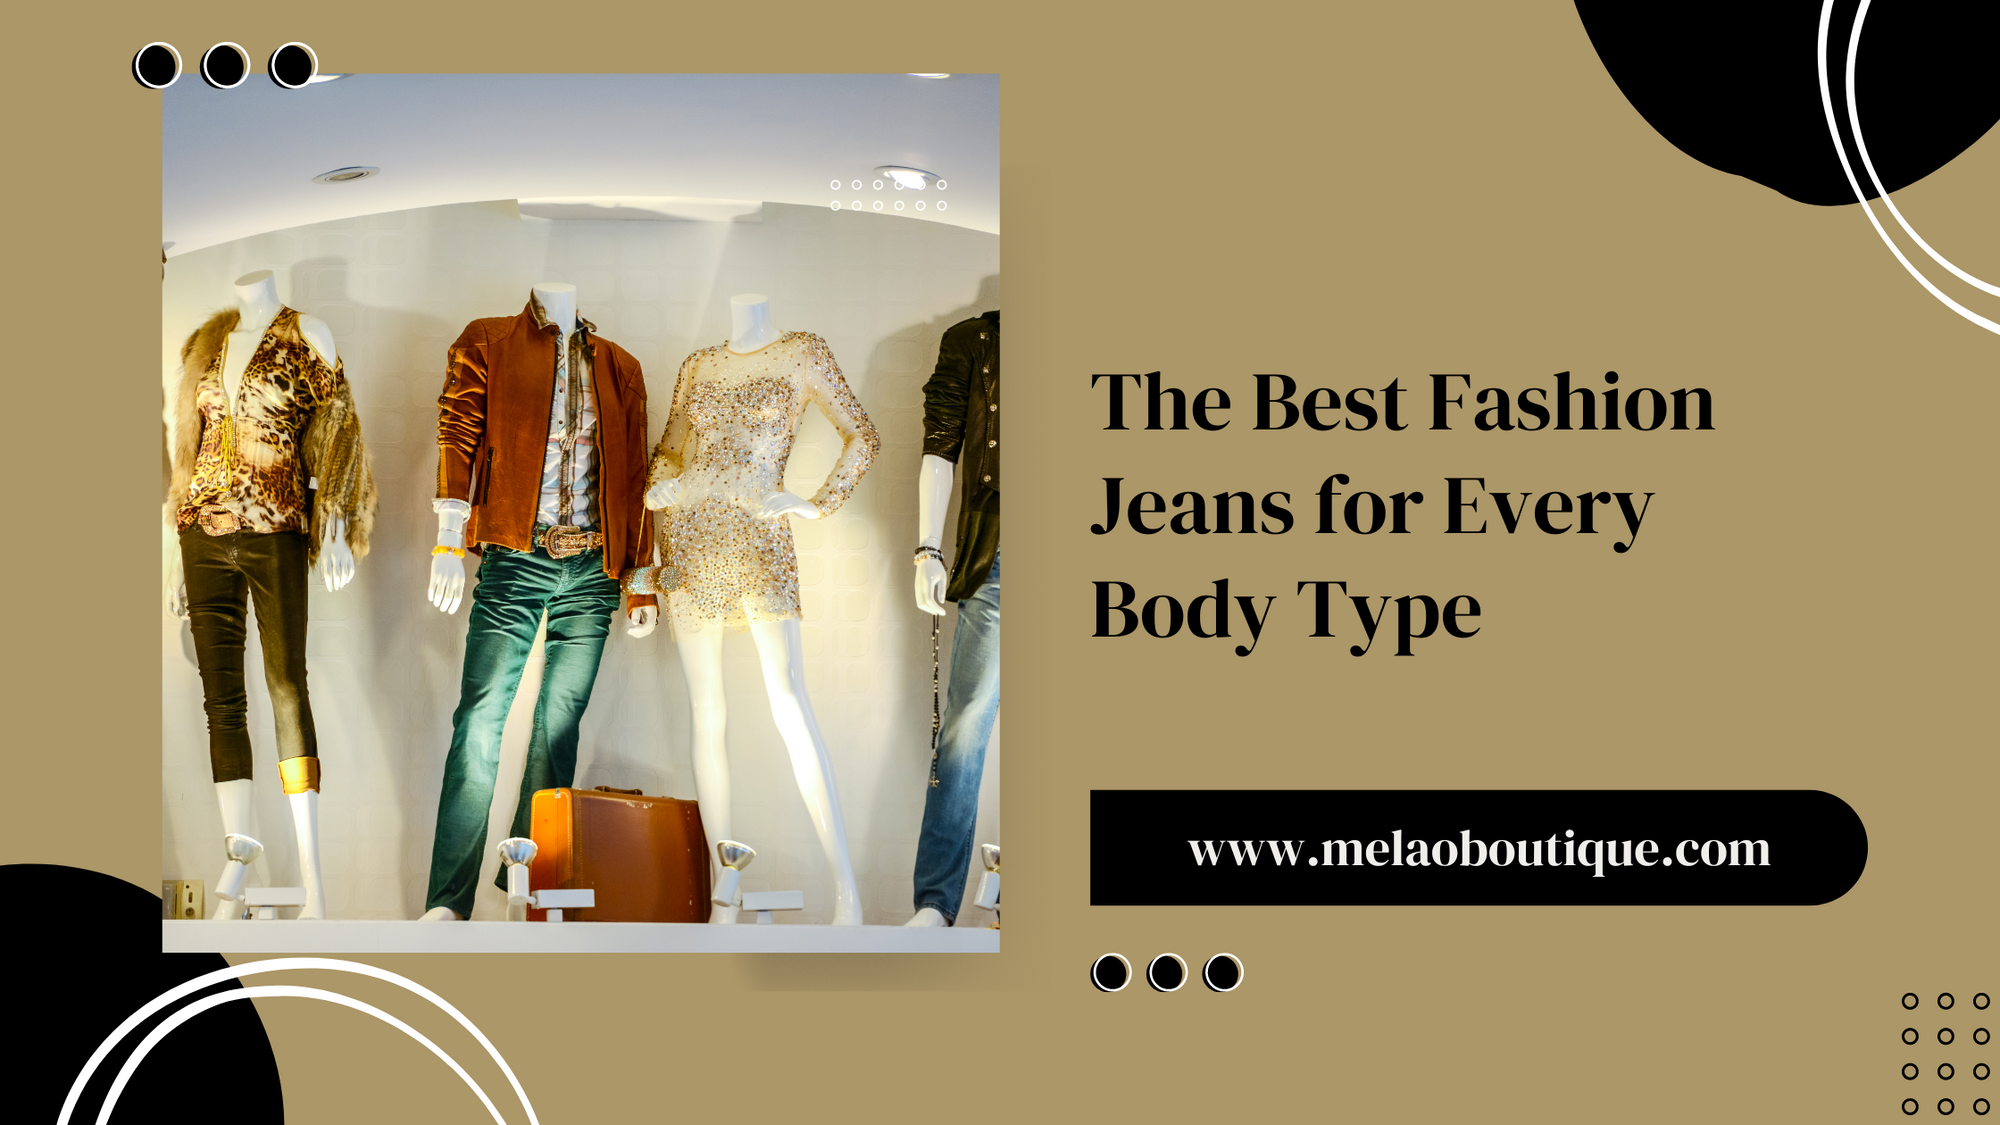 The Best Fashion Jeans for Every Body Type